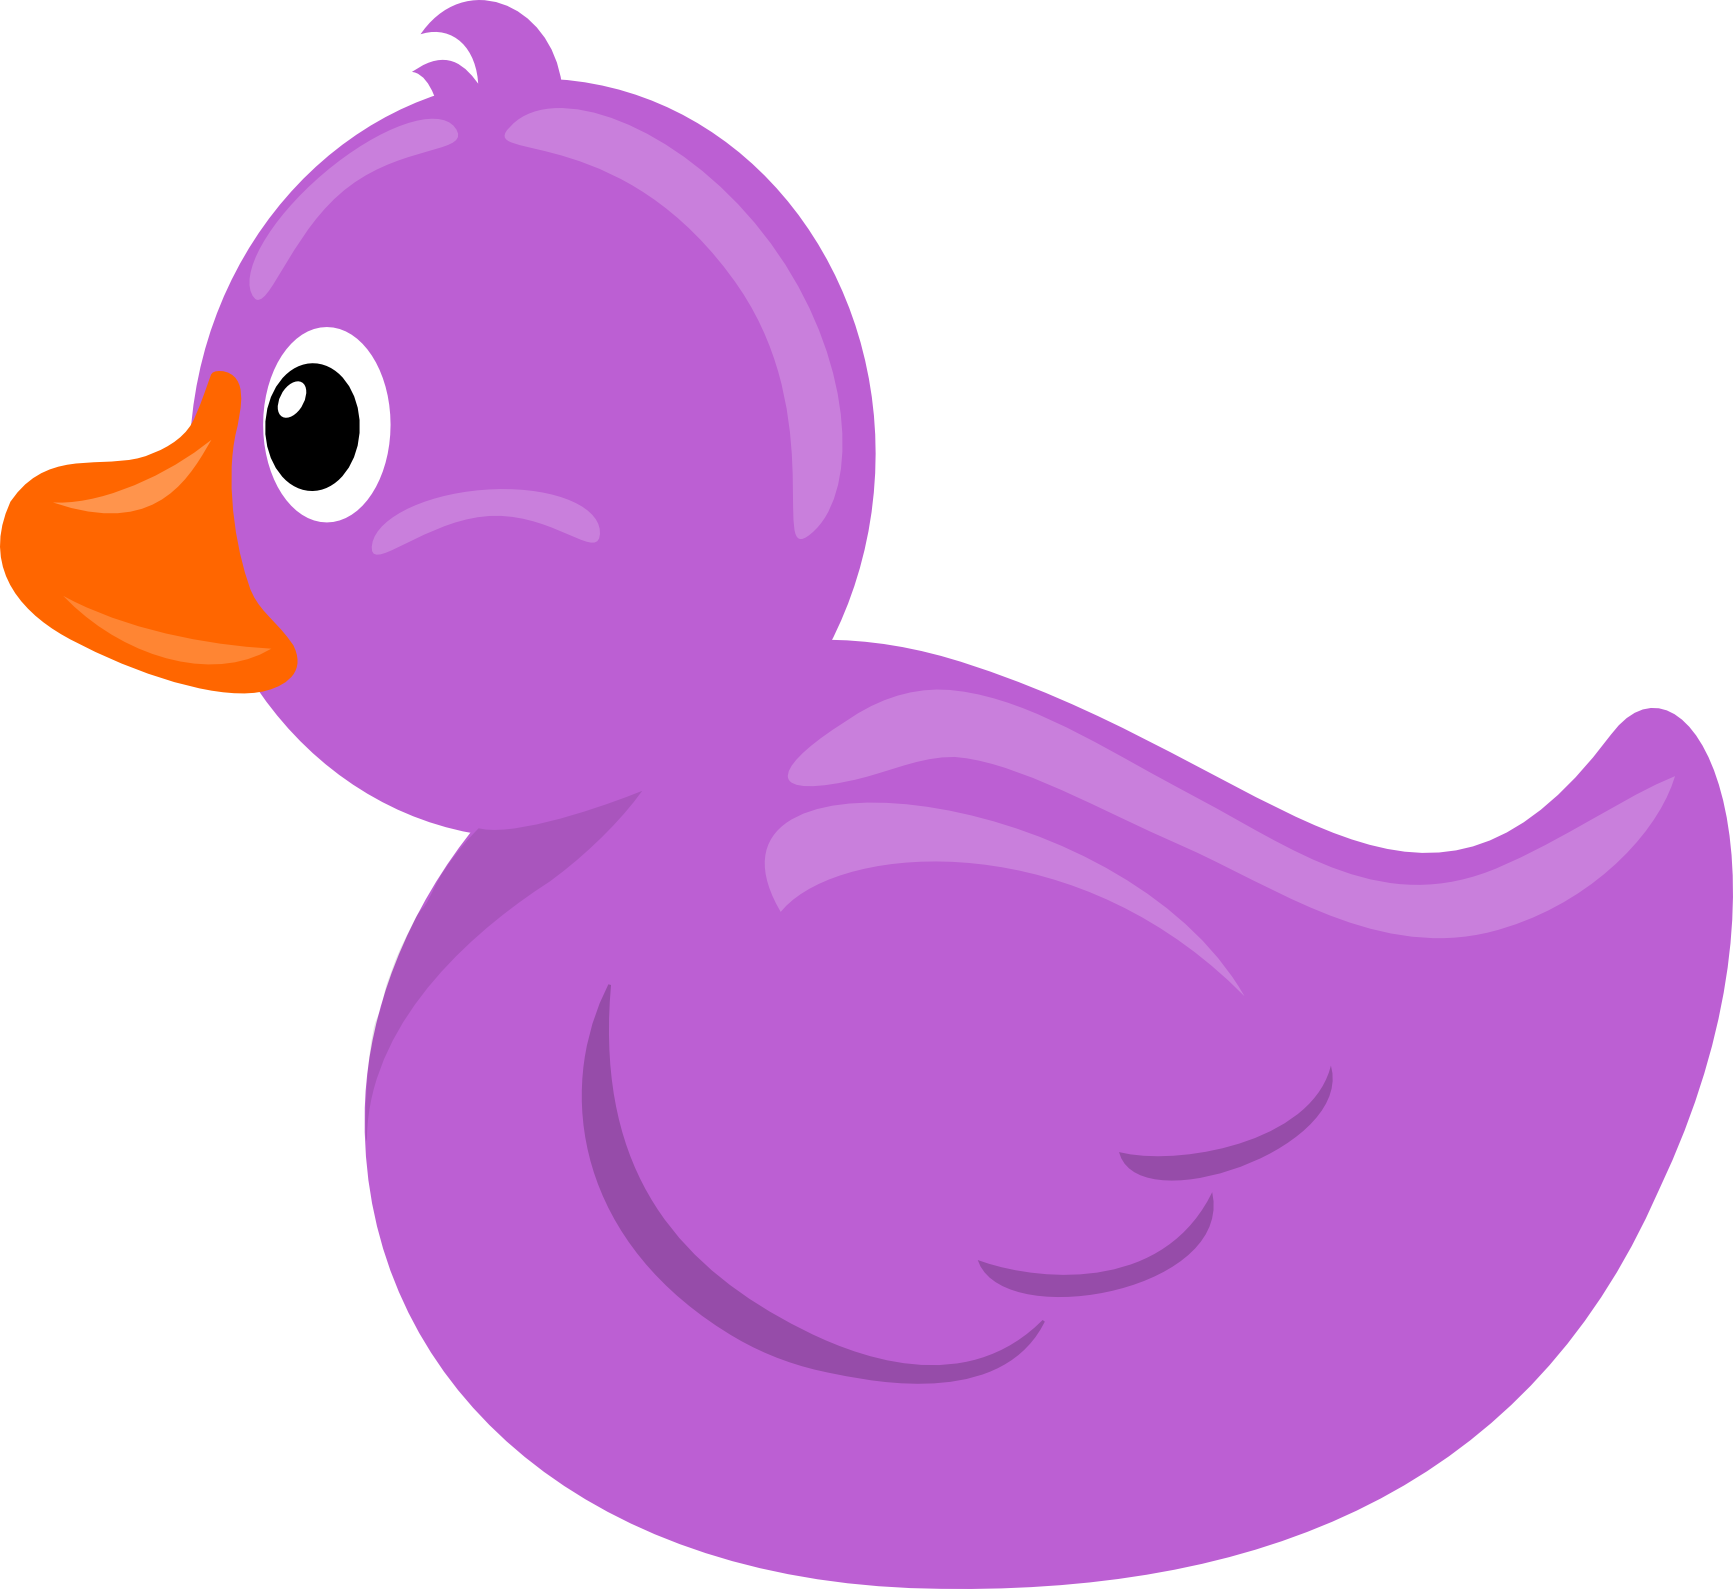 Purple duck pencil and. Duckling clipart duckie